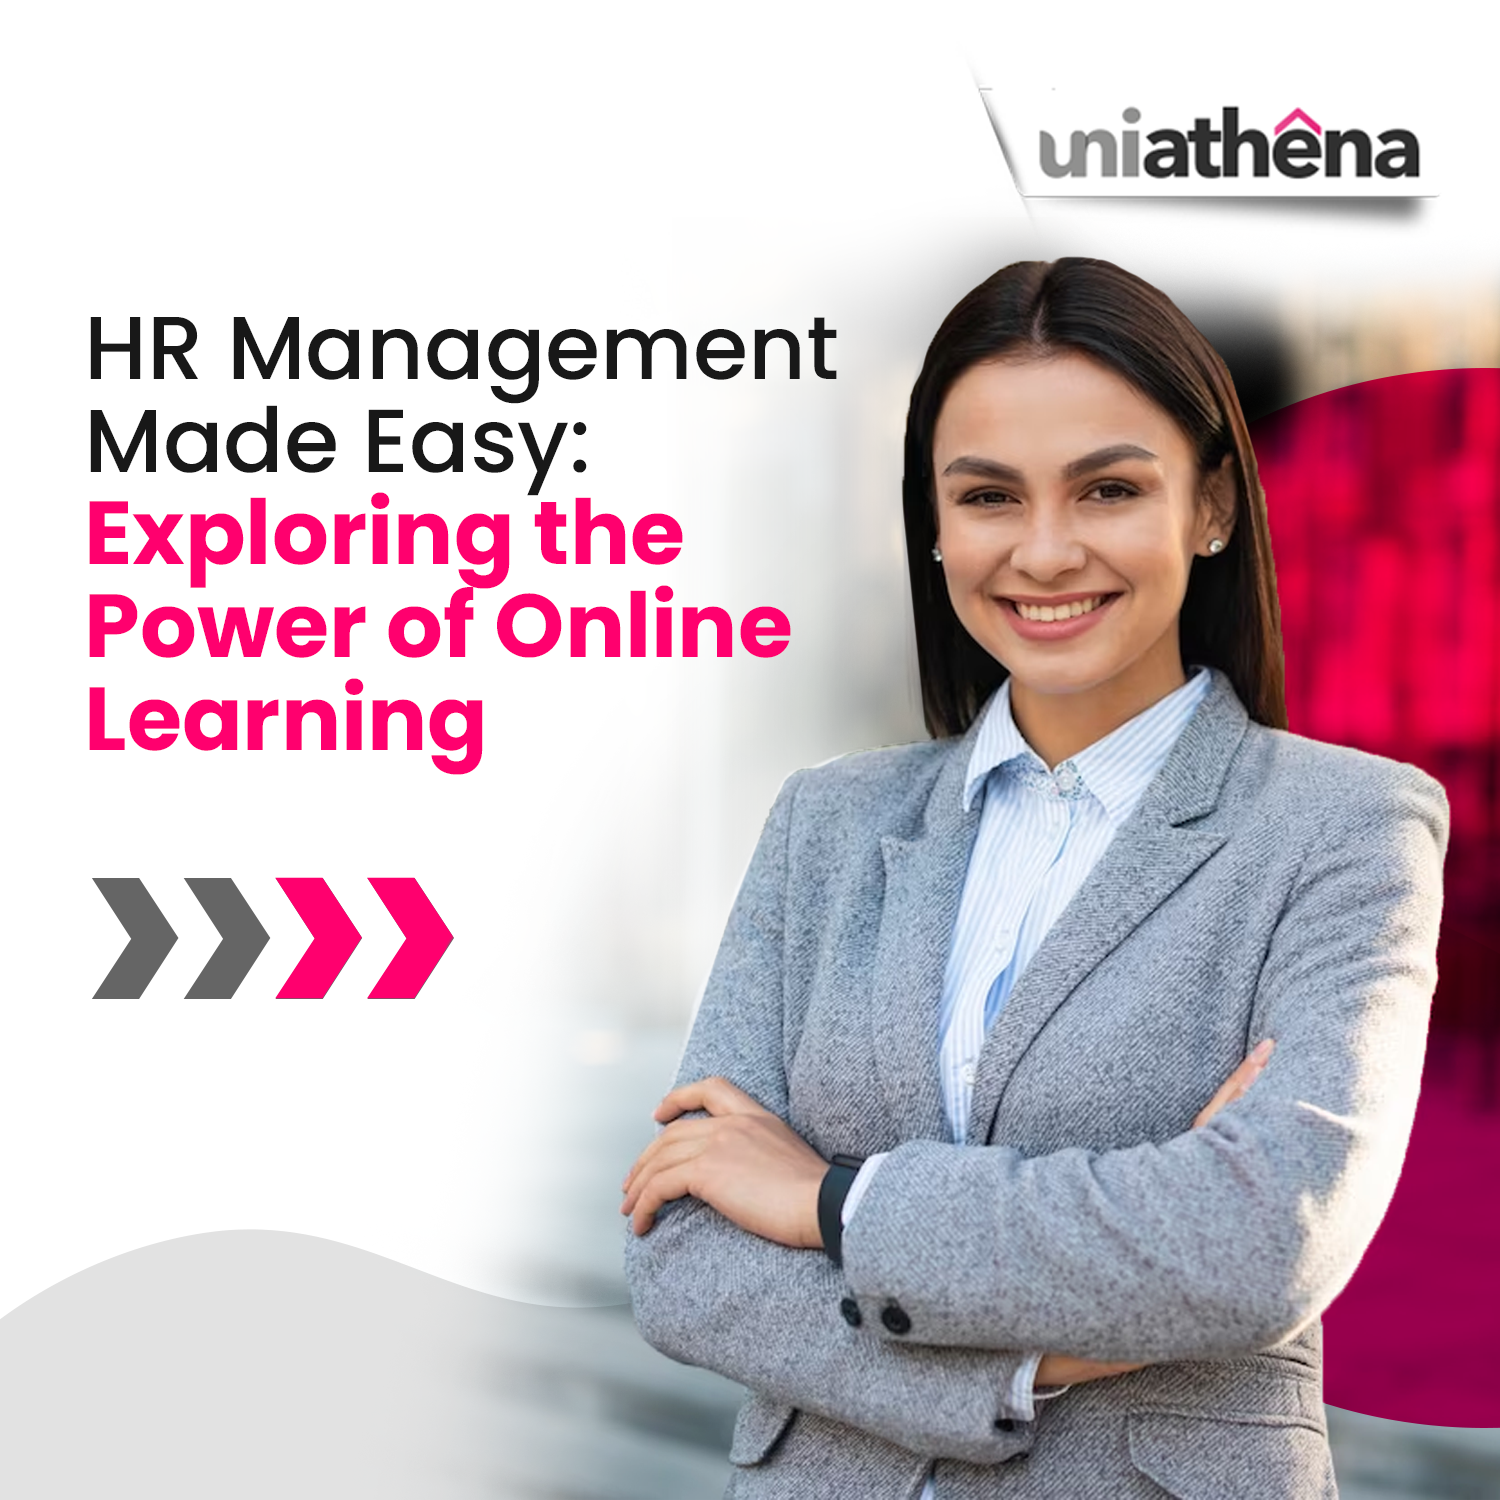 HR Management Made Easy: Exploring the Power of Online Learning